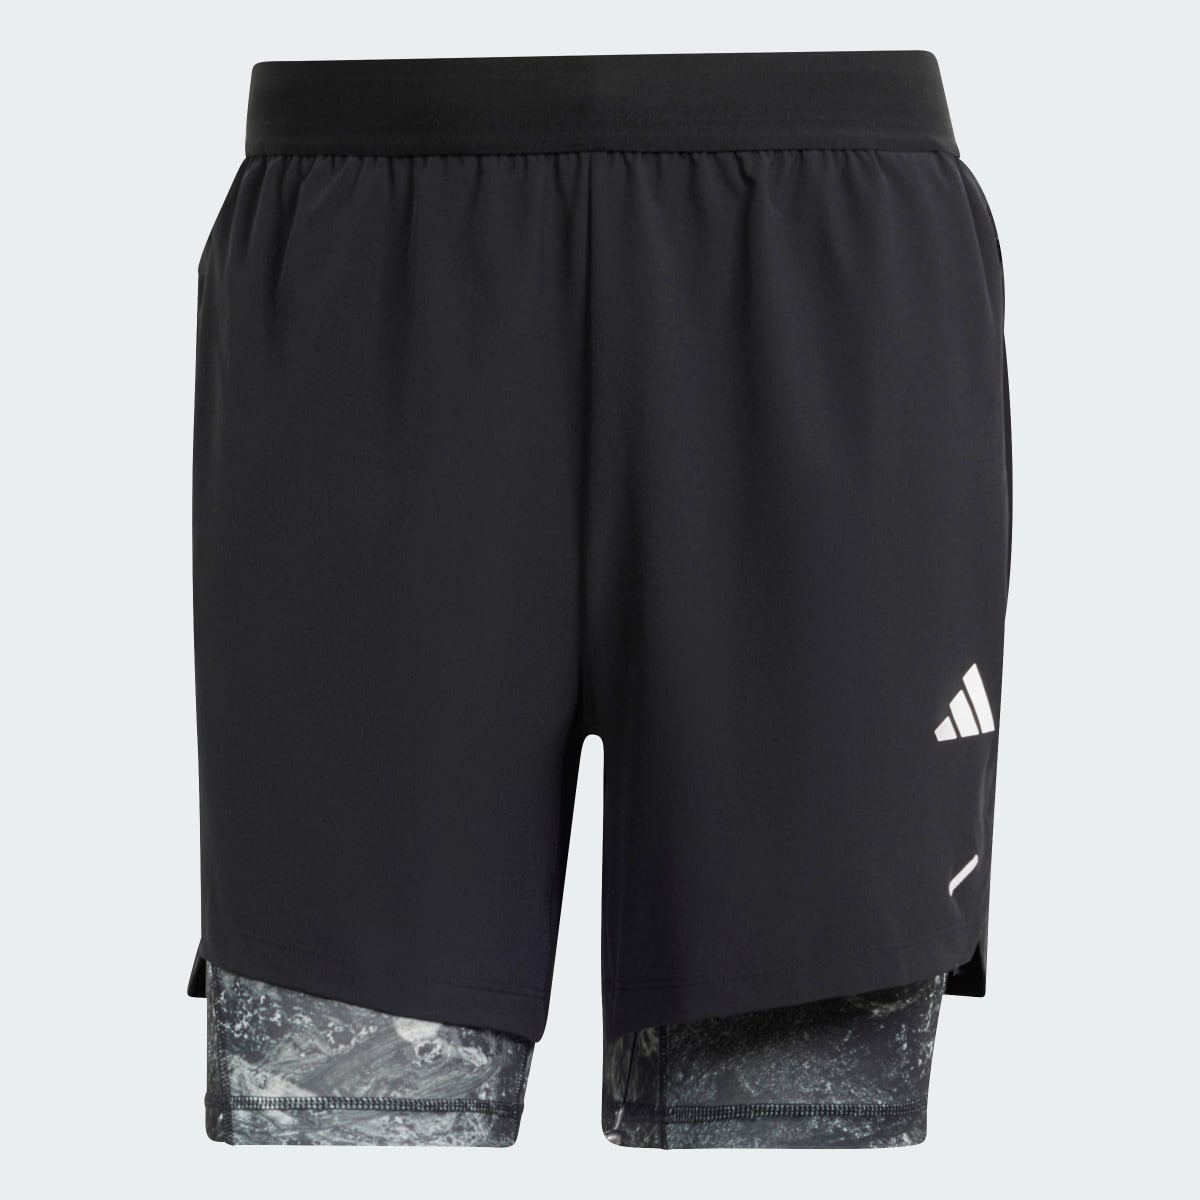 Adidas Power Workout 2-in-1 Shorts. 4